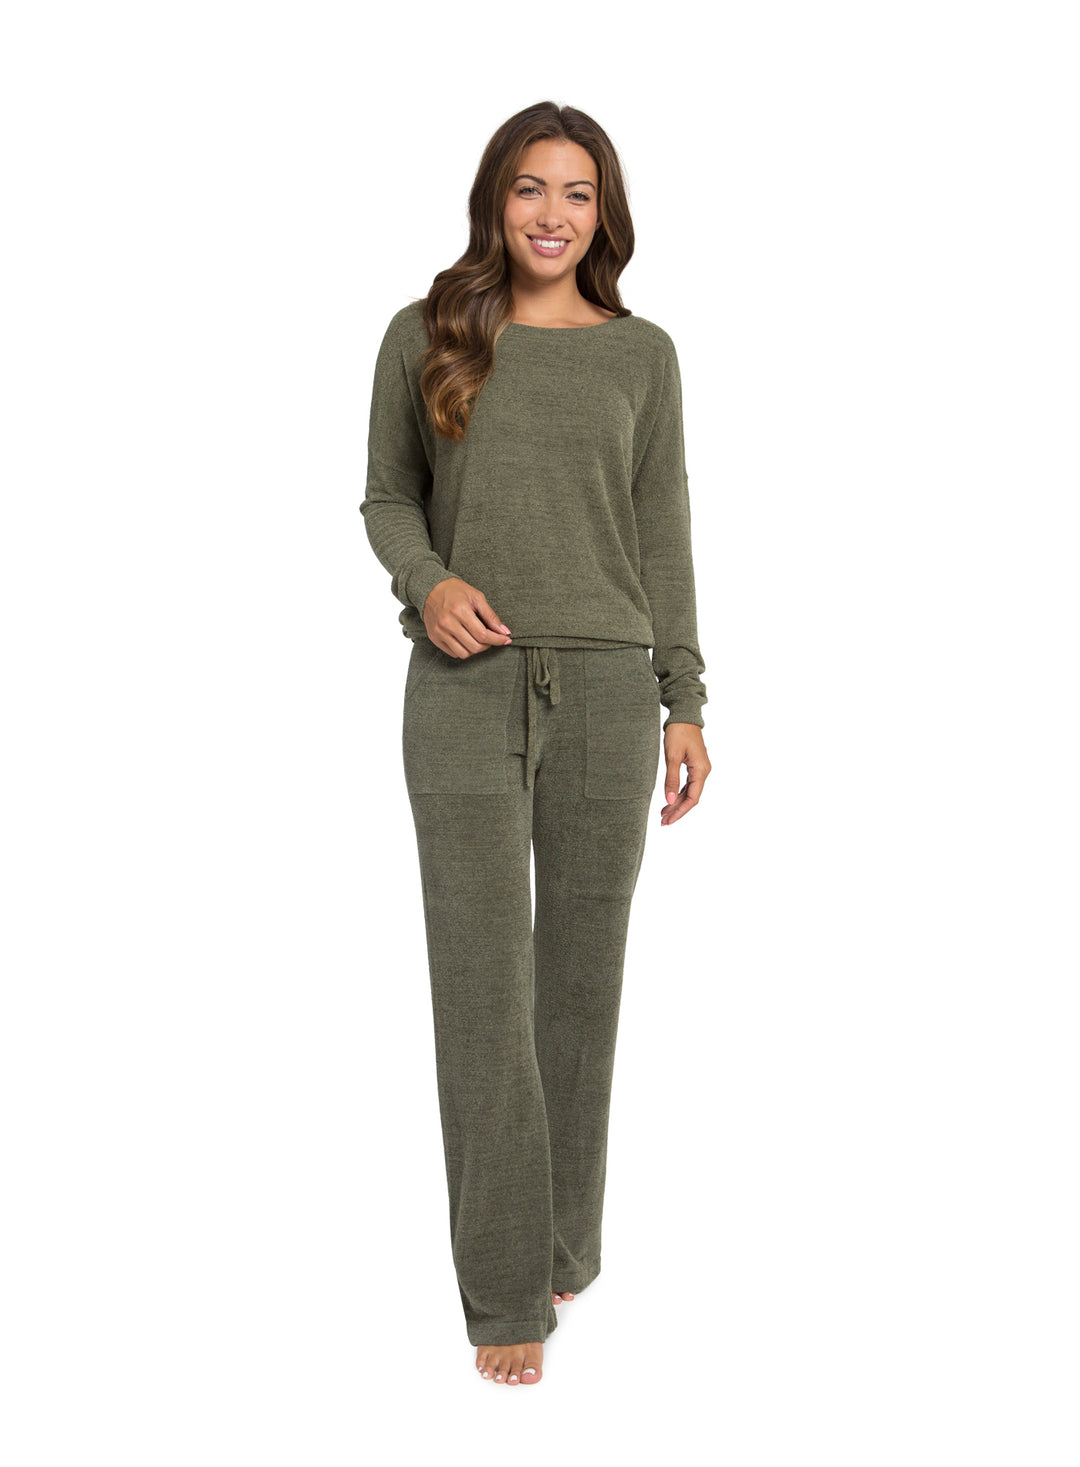 CC-SLOUCHY PULLOVER-OLIVE - Kingfisher Road - Online Boutique